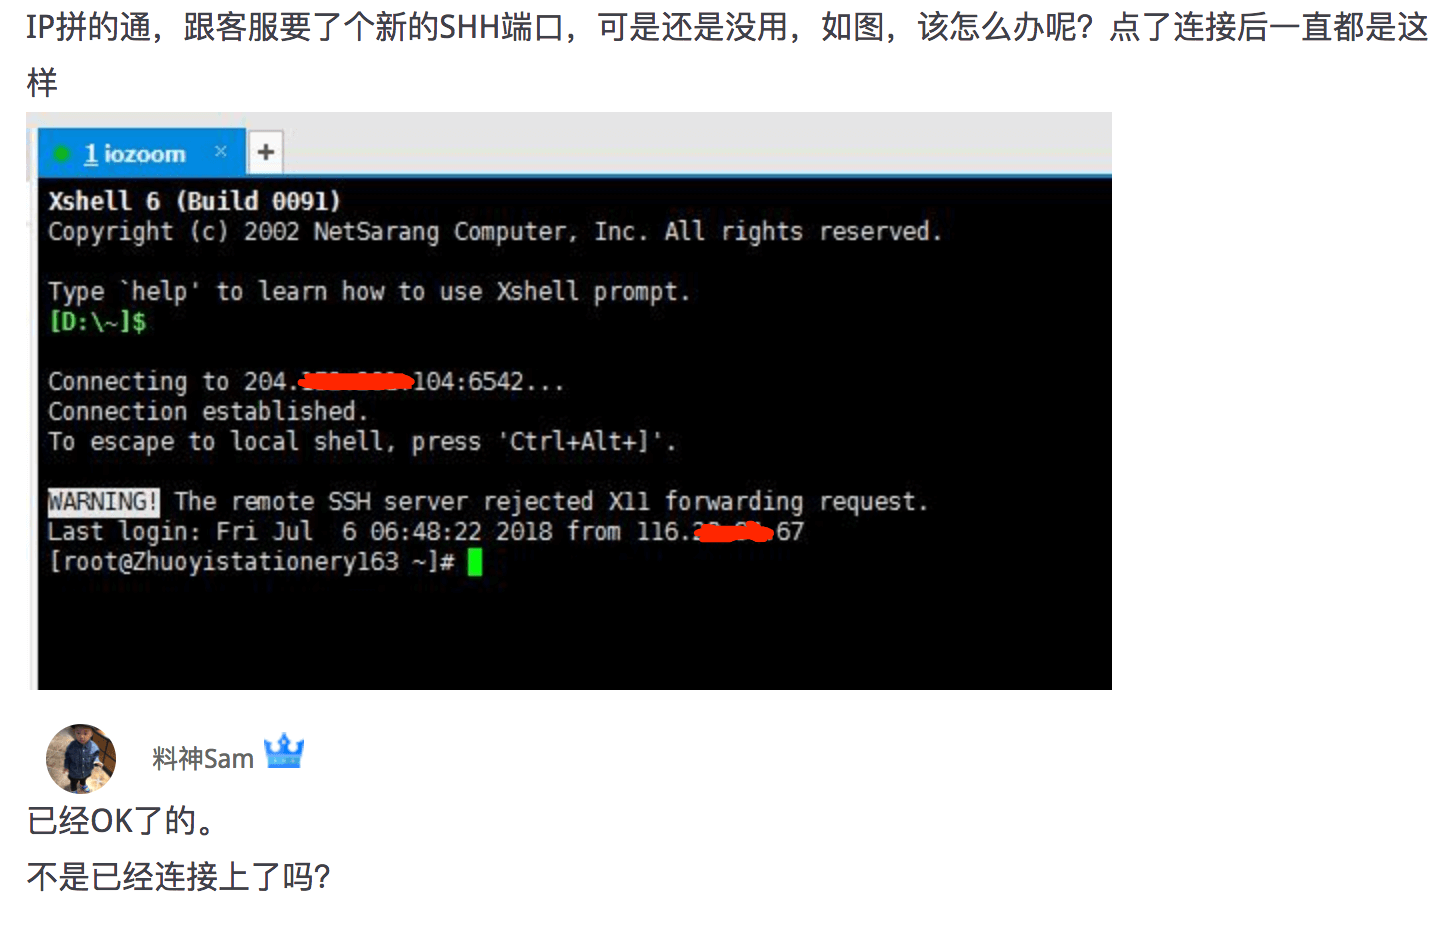 Xshell 6 连接时提示：WARNING! The remote SSH server rejected x11 forwarding request.